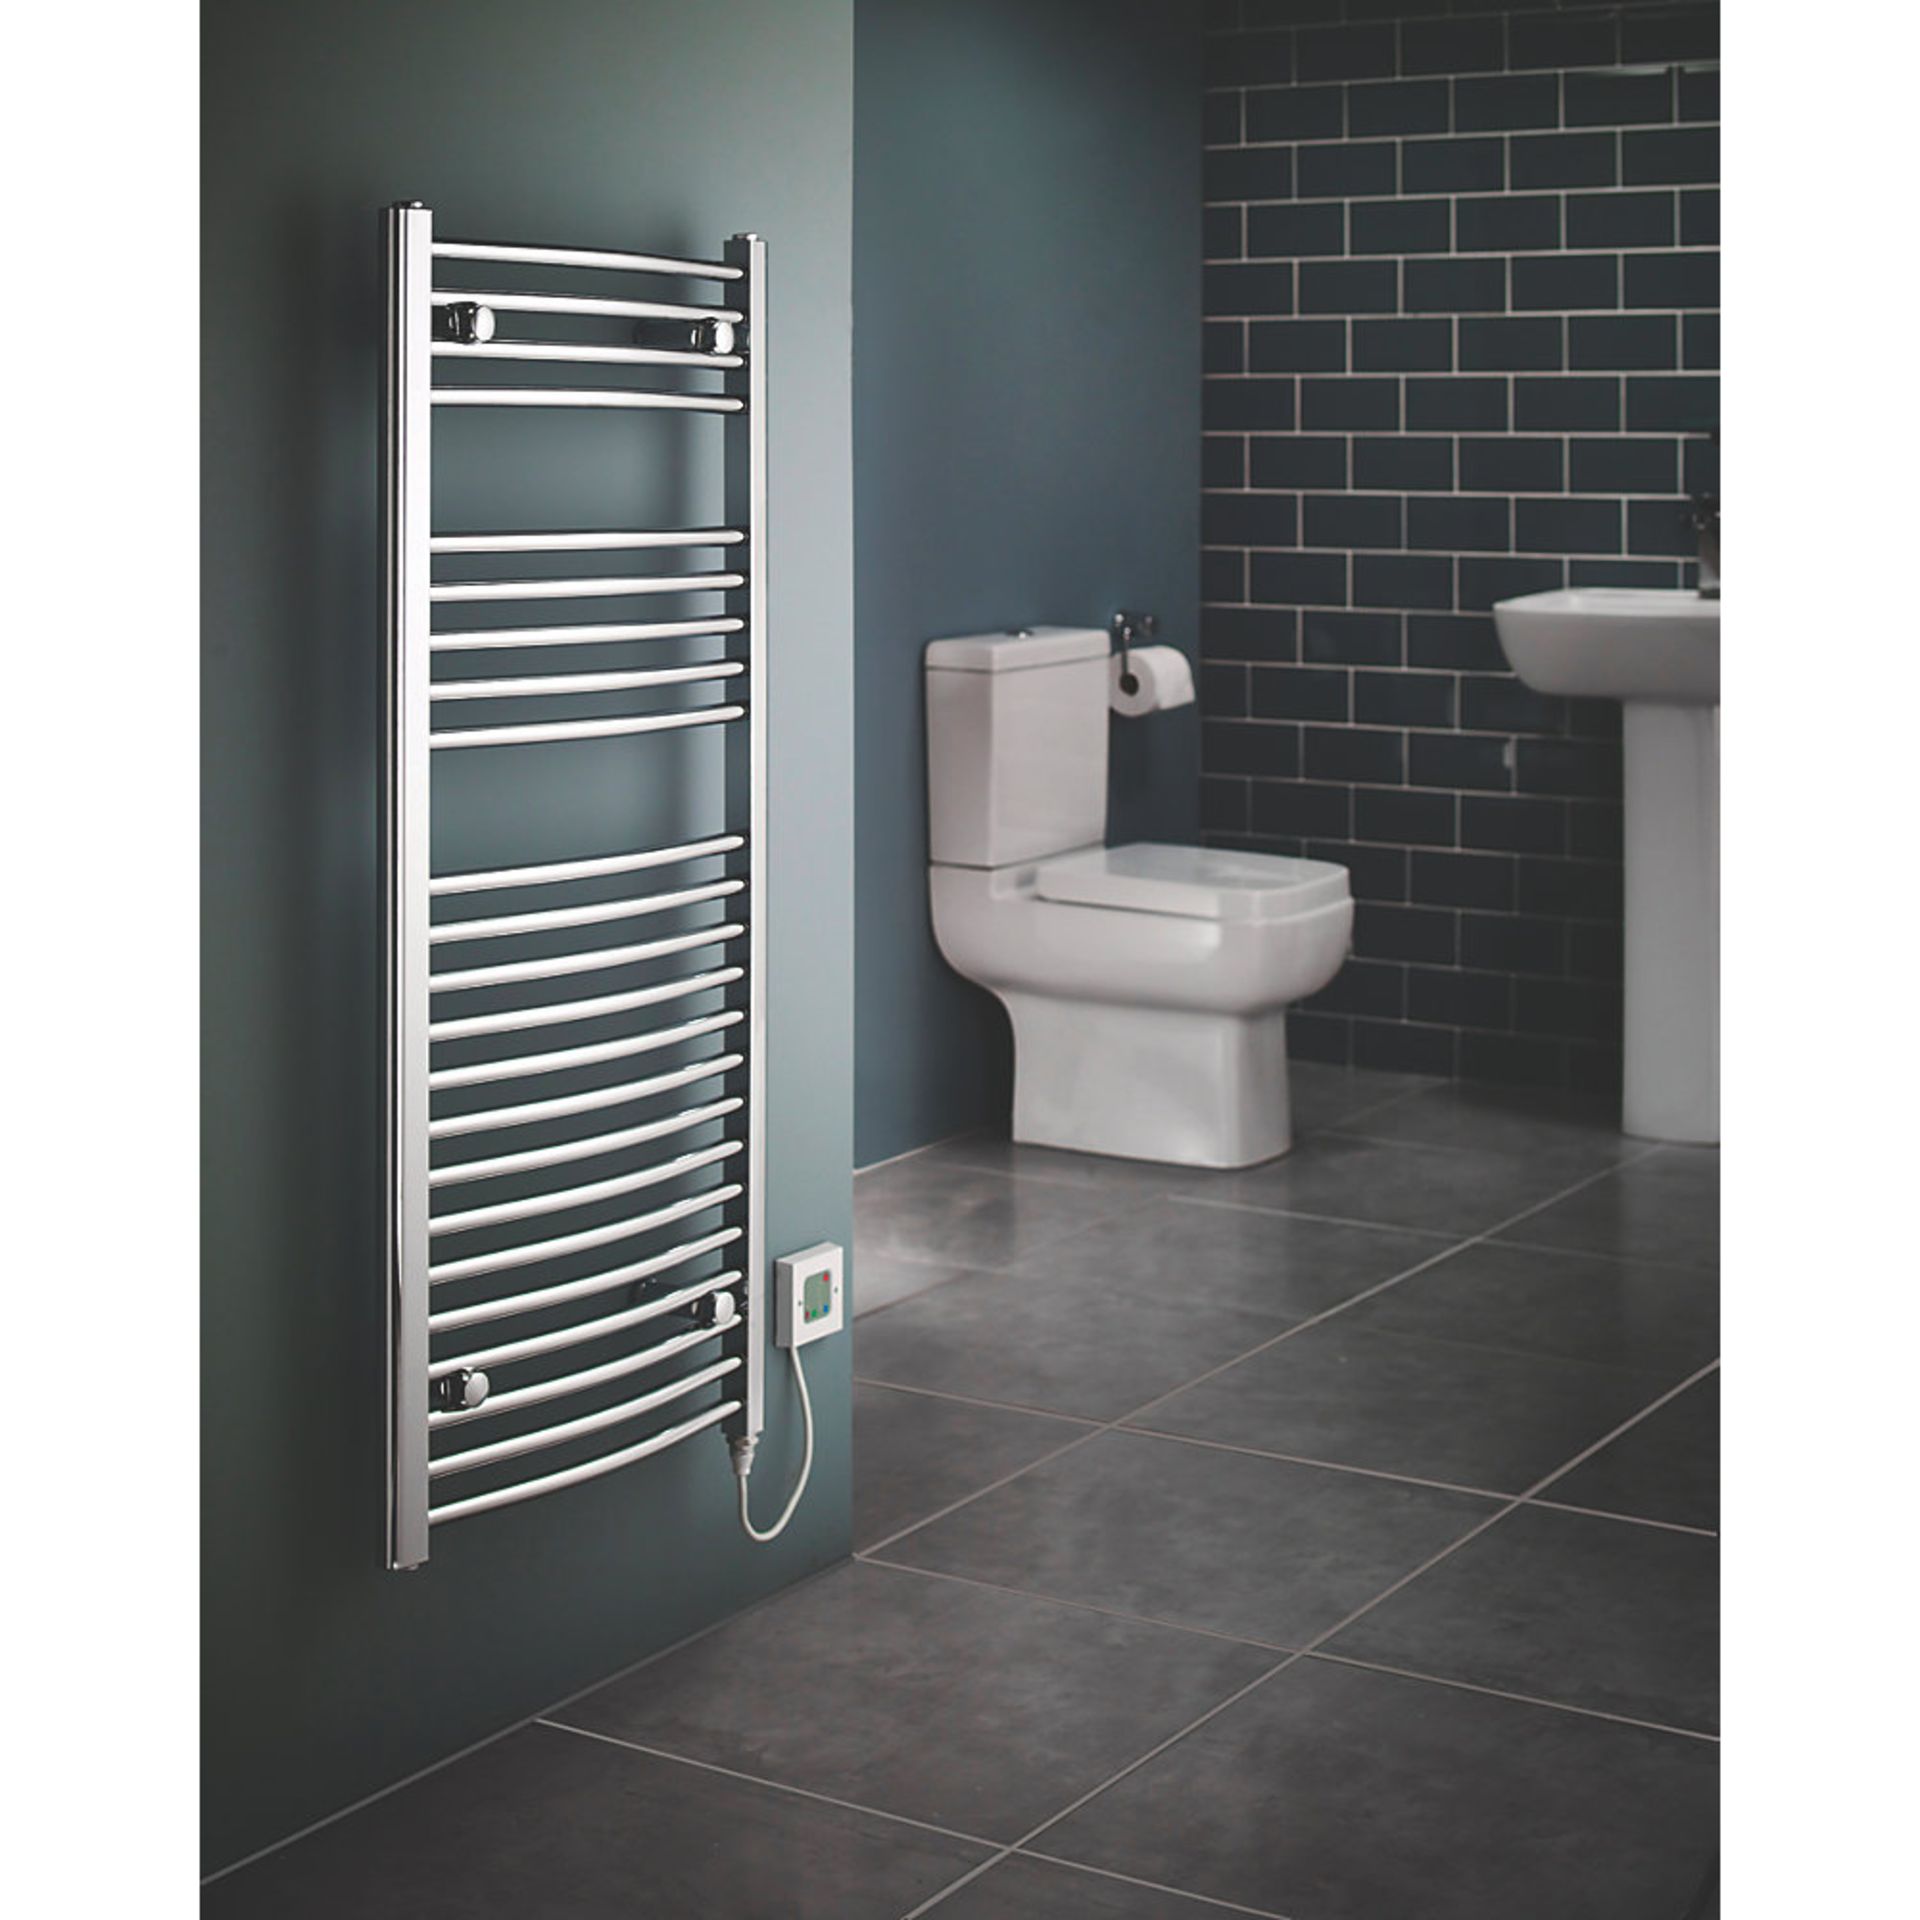 (XL97) 1100X500mm FLOMASTA CURVED ELECTRIC TOWEL RADIATOR Chrome. RRP £169.99. Electrical inst...